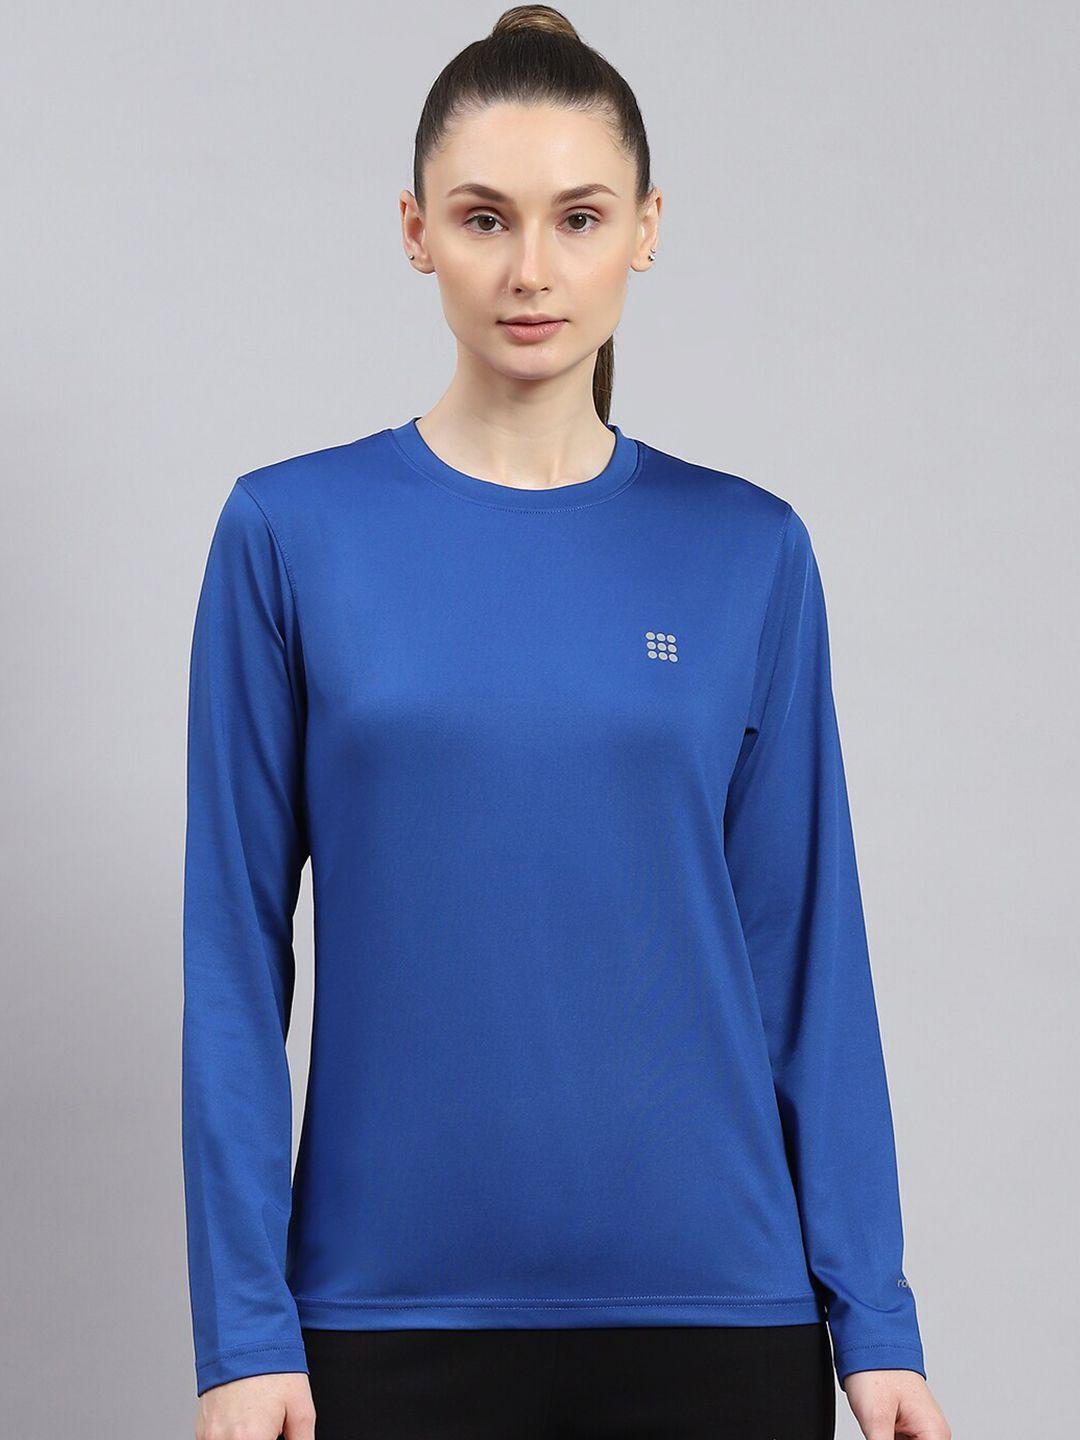 rock.it-round-neck-long-sleeves-sports-t-shirt